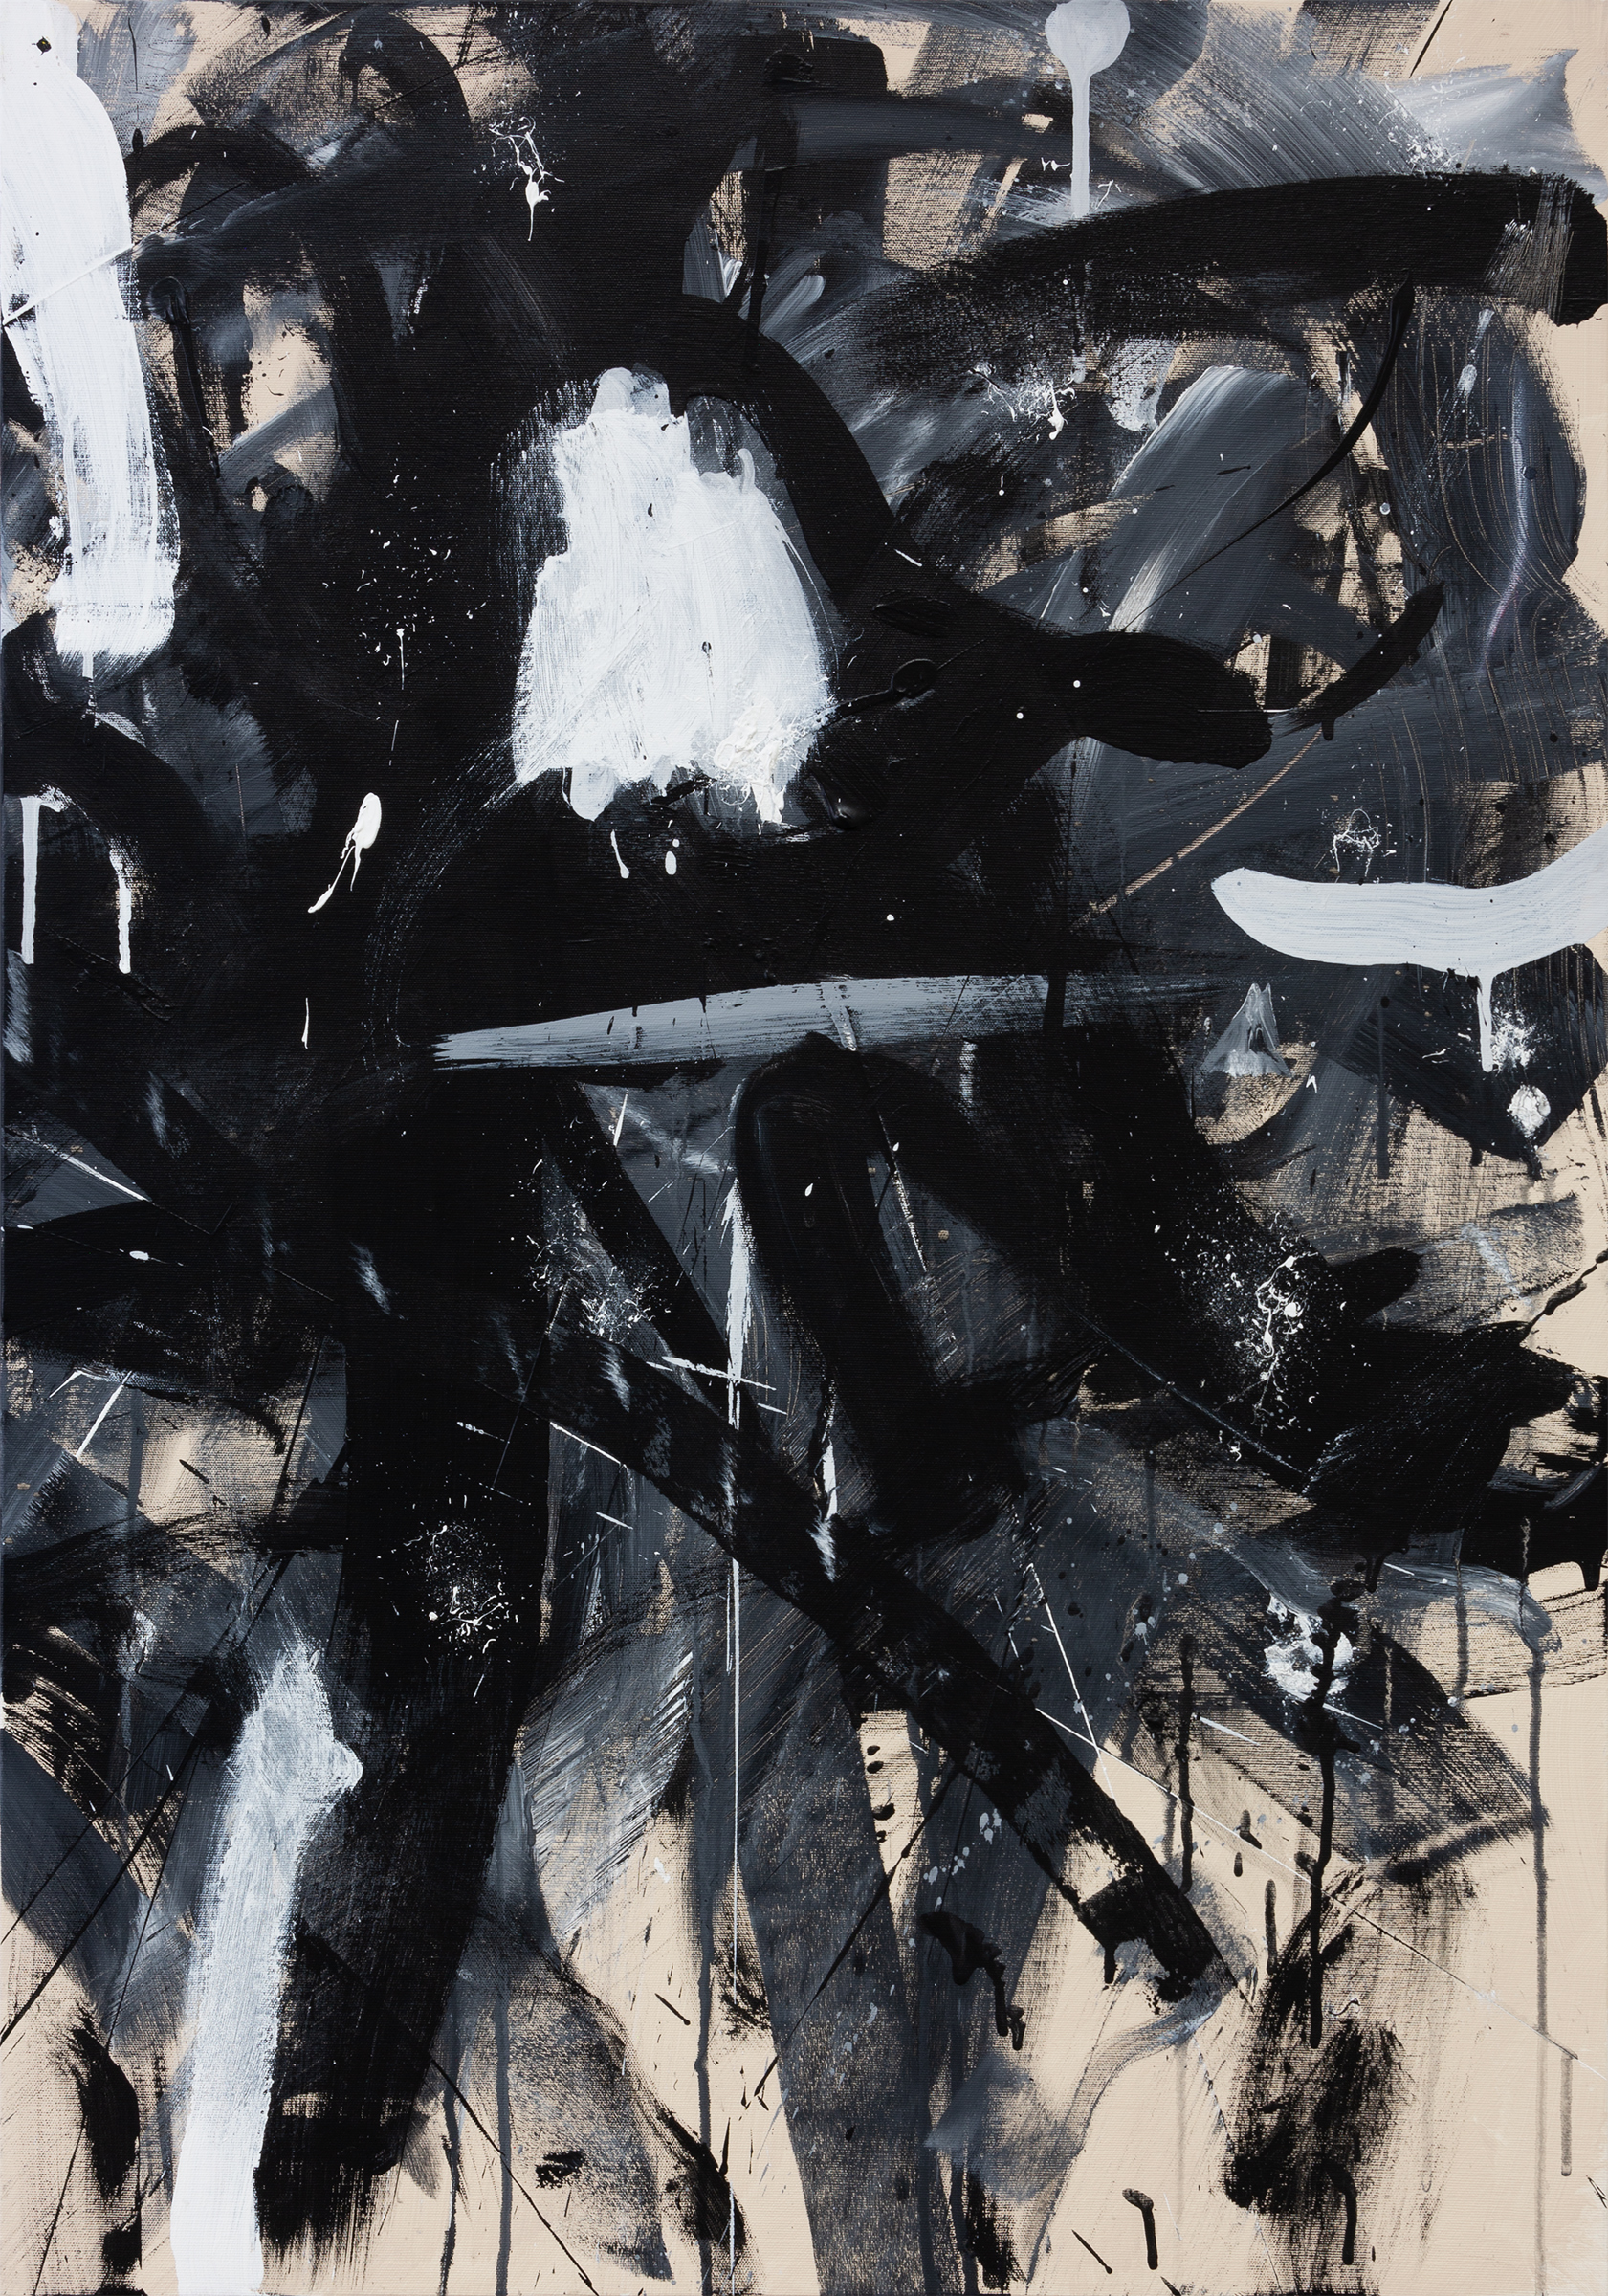 Black and white n. 4, 2023 | Acrylic on canvas, triptych 2/3, 100 x 70 cm